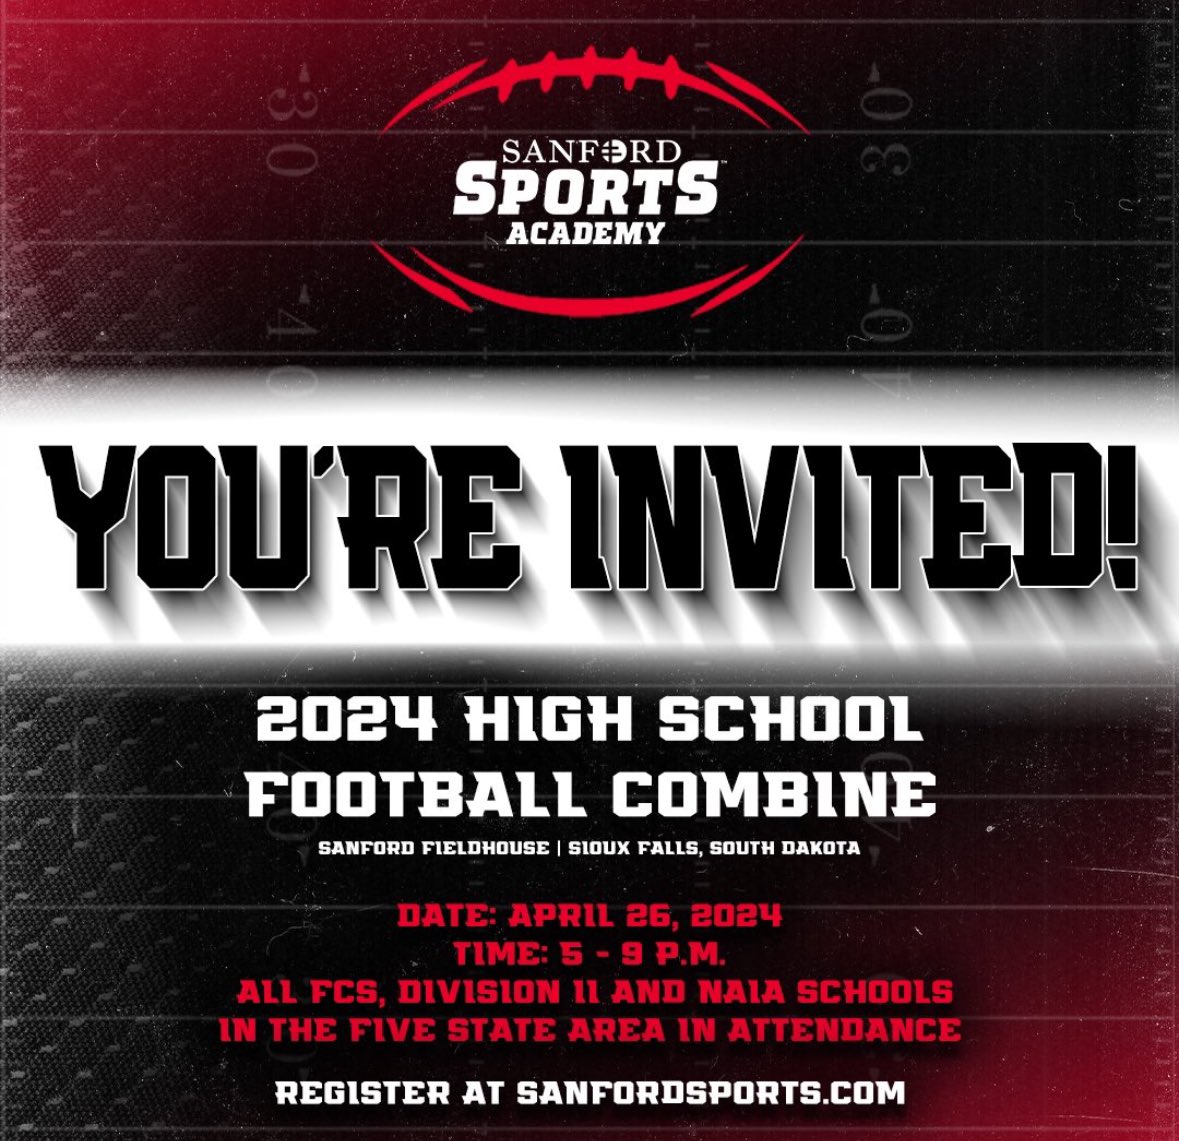 Thanks for invite @riggsfootball @GriffFootball